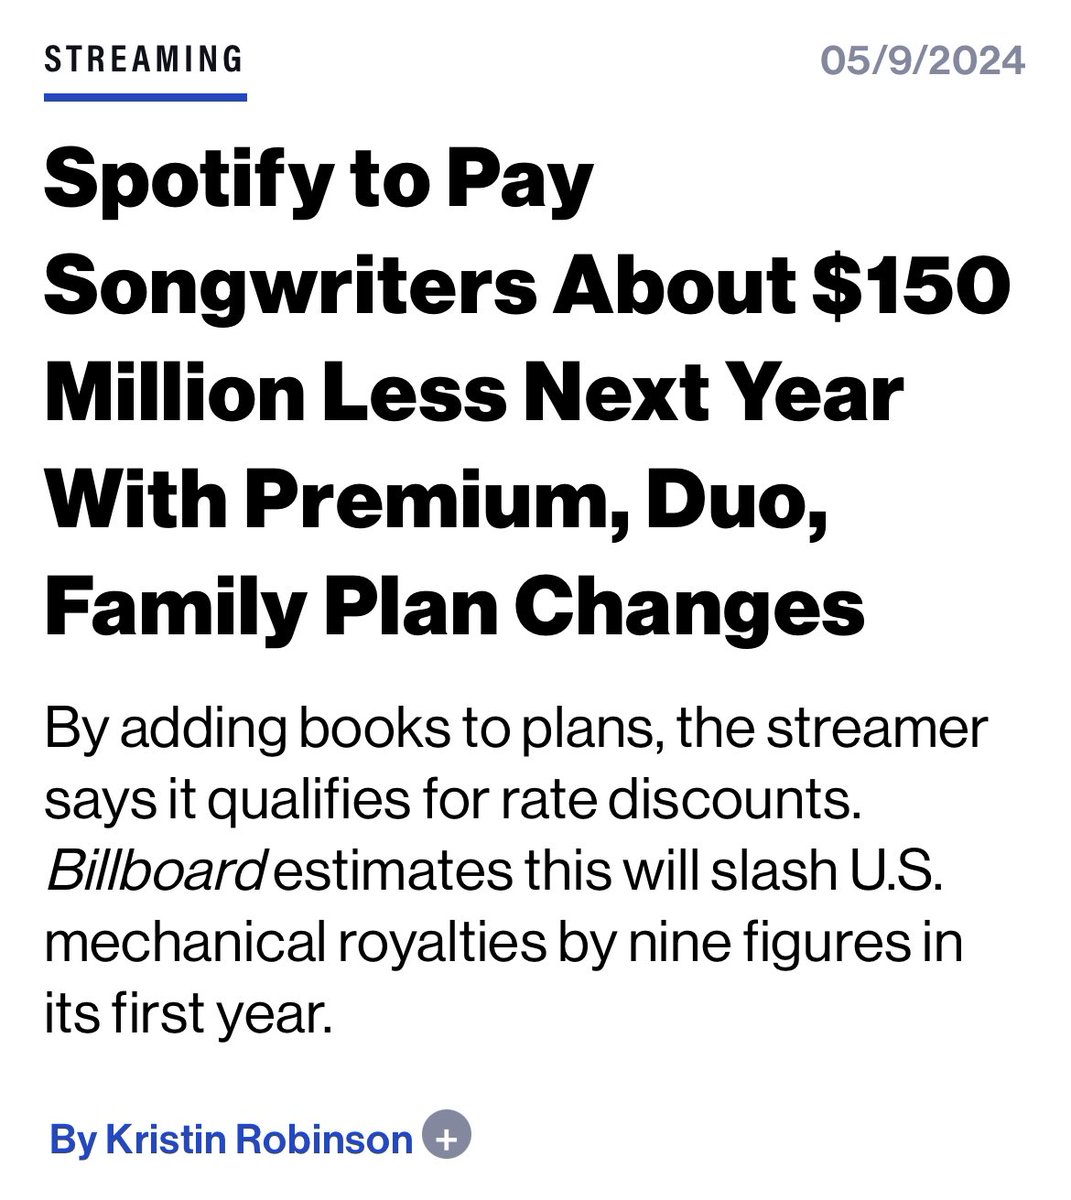 Billboard reports that Spotify’s new bundling scheme will pay songwriters $150 million dollars less next year. It’s time for DSPs to pay artists, musicians, and songwriters fairly! We need the Living Wage for Musicians Act now!